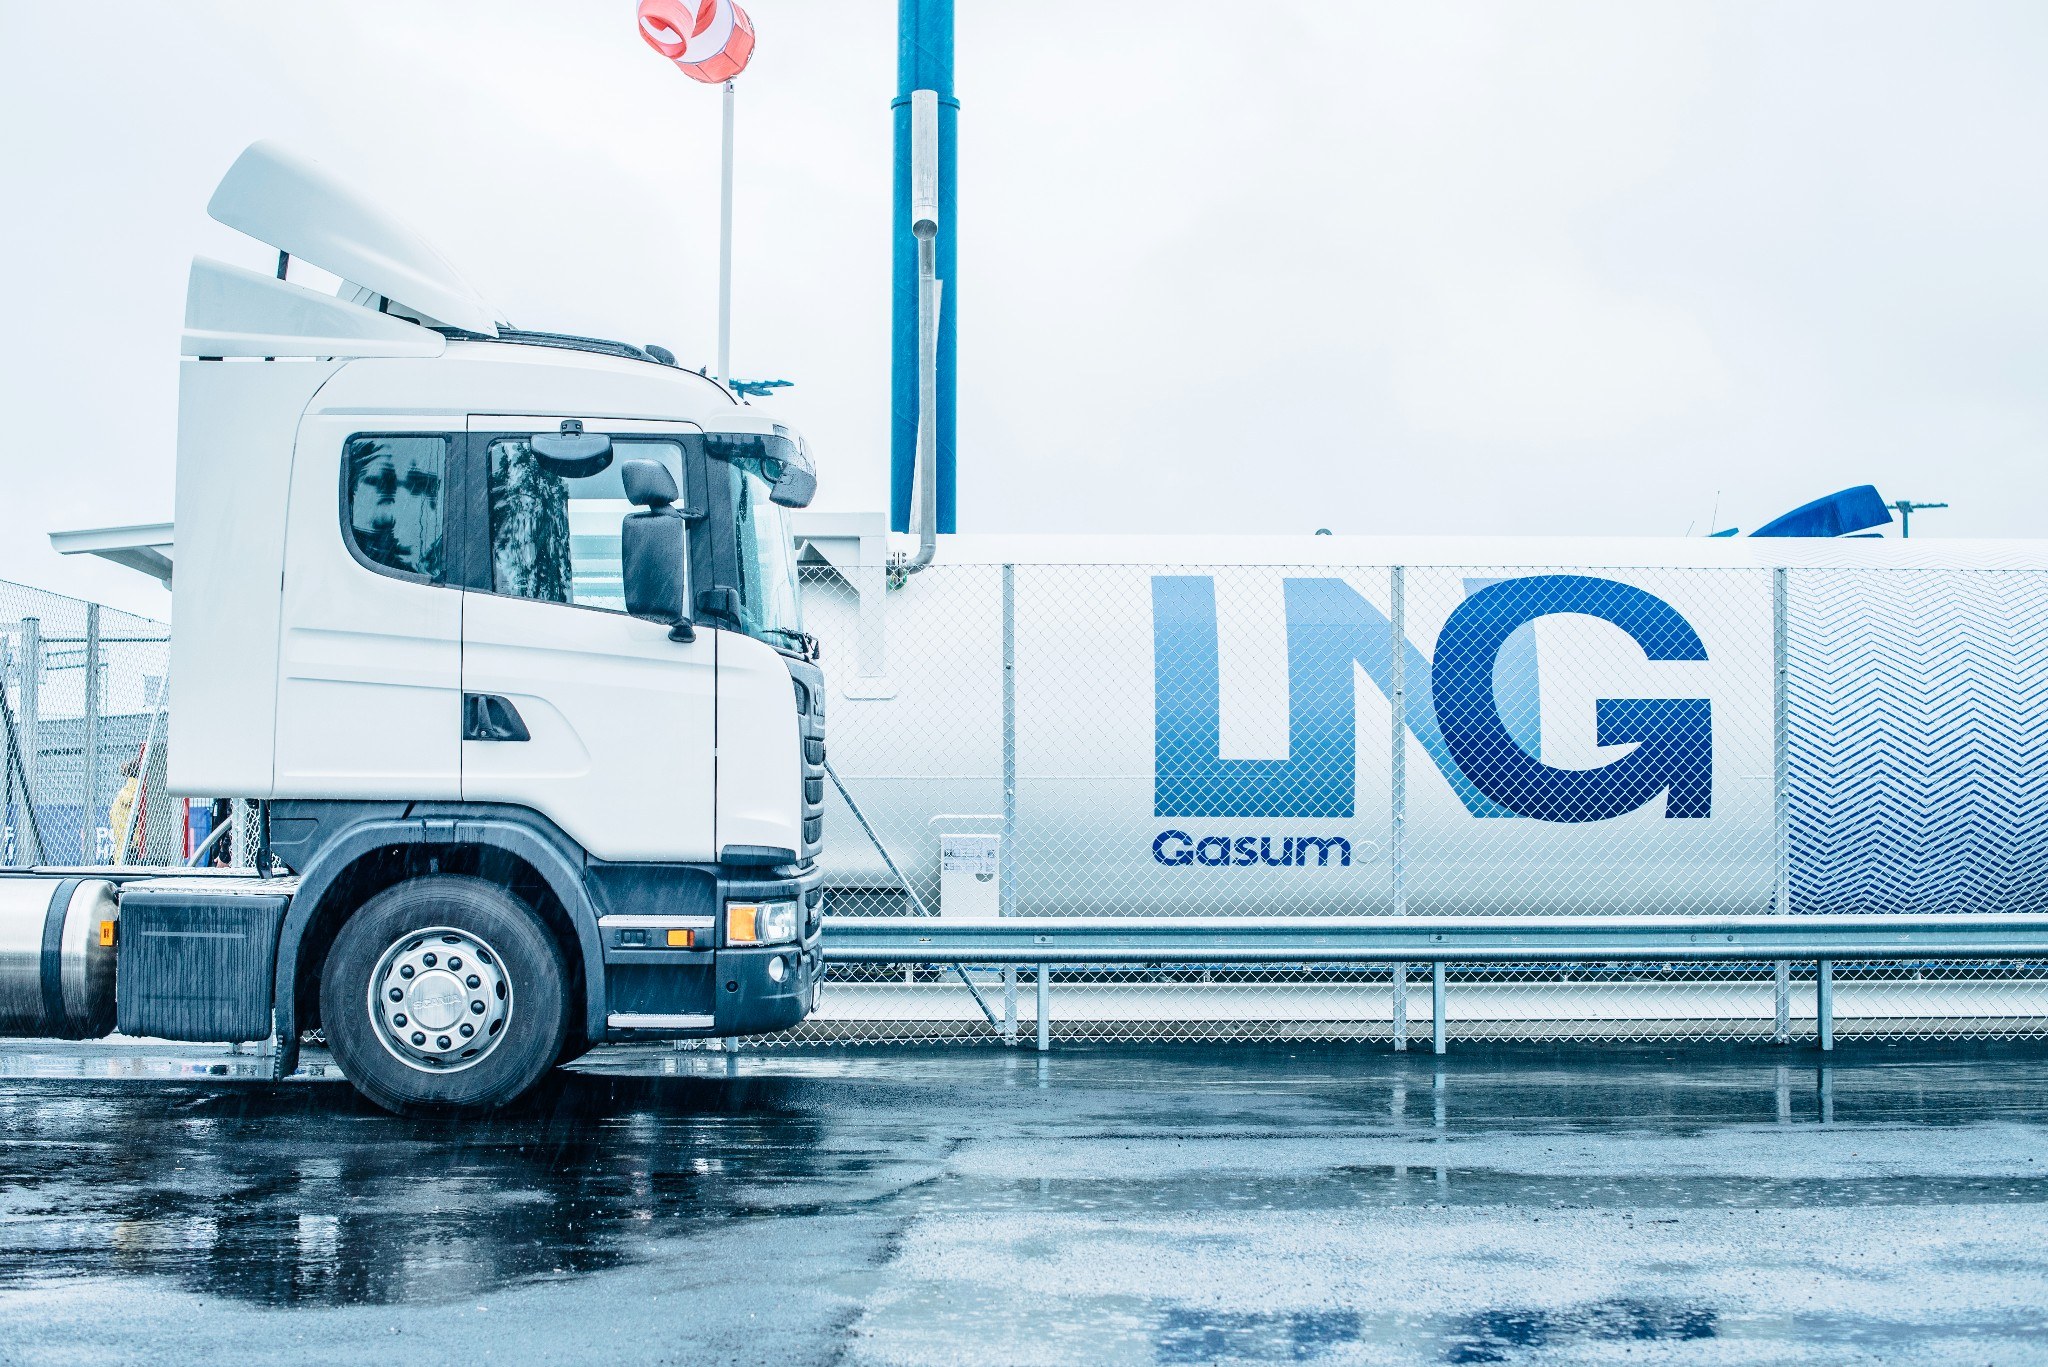 Gasum expands with new business acquisitions